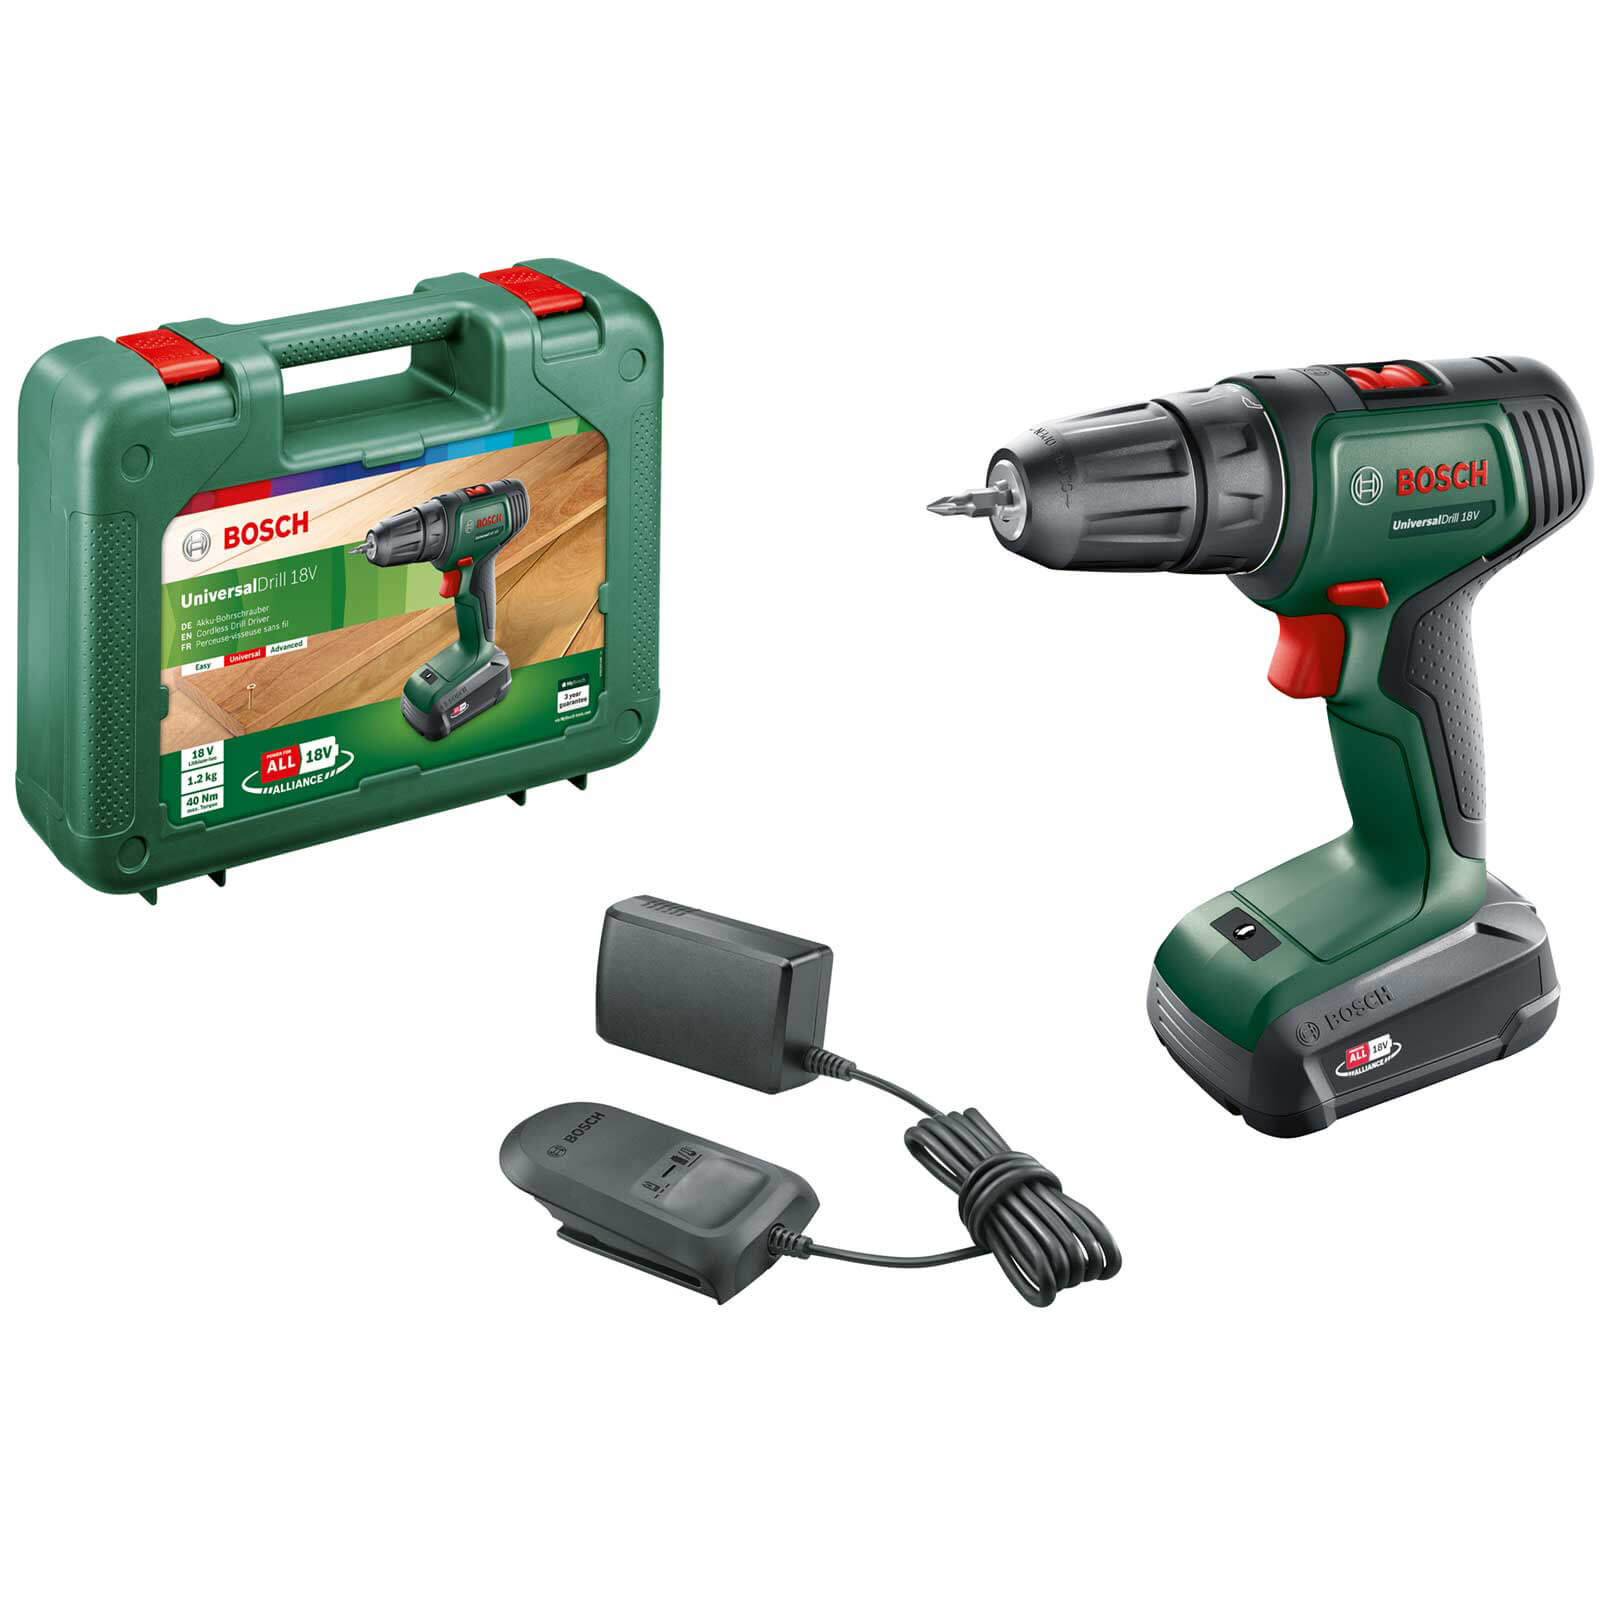 Image of Bosch UNIVERSALDRILL 18v Cordless Drill Driver 1 x 1.5ah Li-ion Charger Case